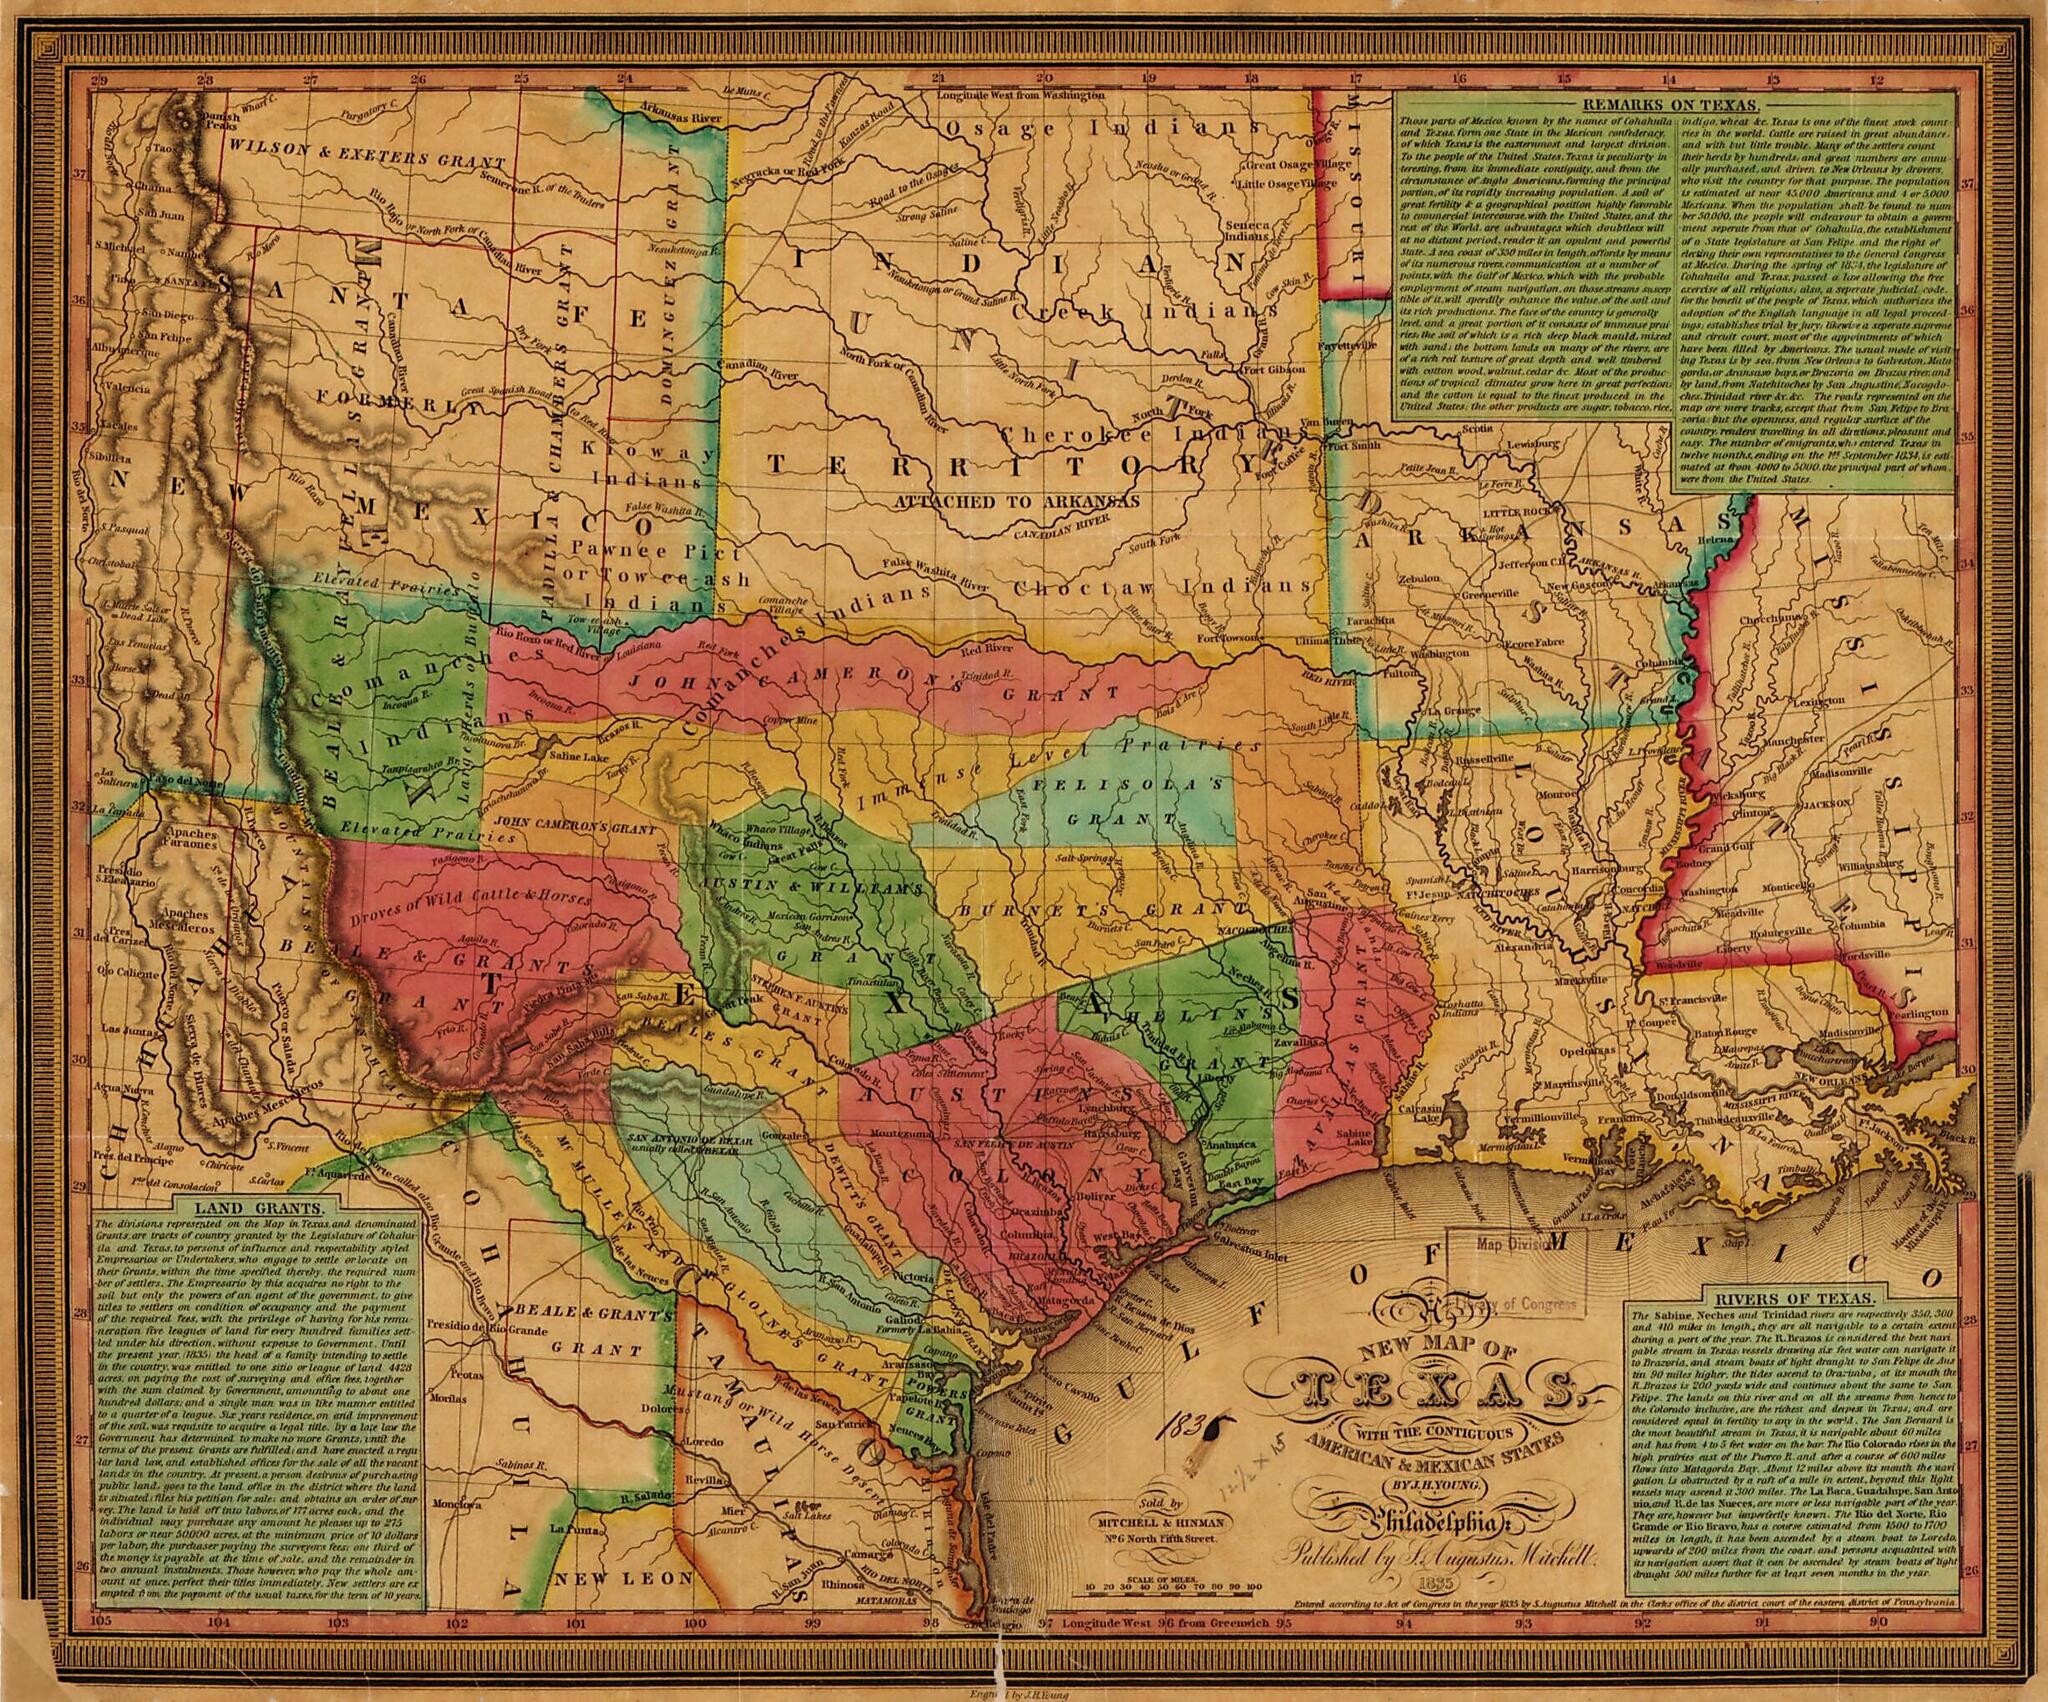 This old map of New Map of Texas : With the Contiguous American &amp; Mexican States from 1835 was created by  Mitchell &amp; Hinman, S. Augustus (Samuel Augustus) Mitchell, J. H. (James Hamilton) Young in 1835